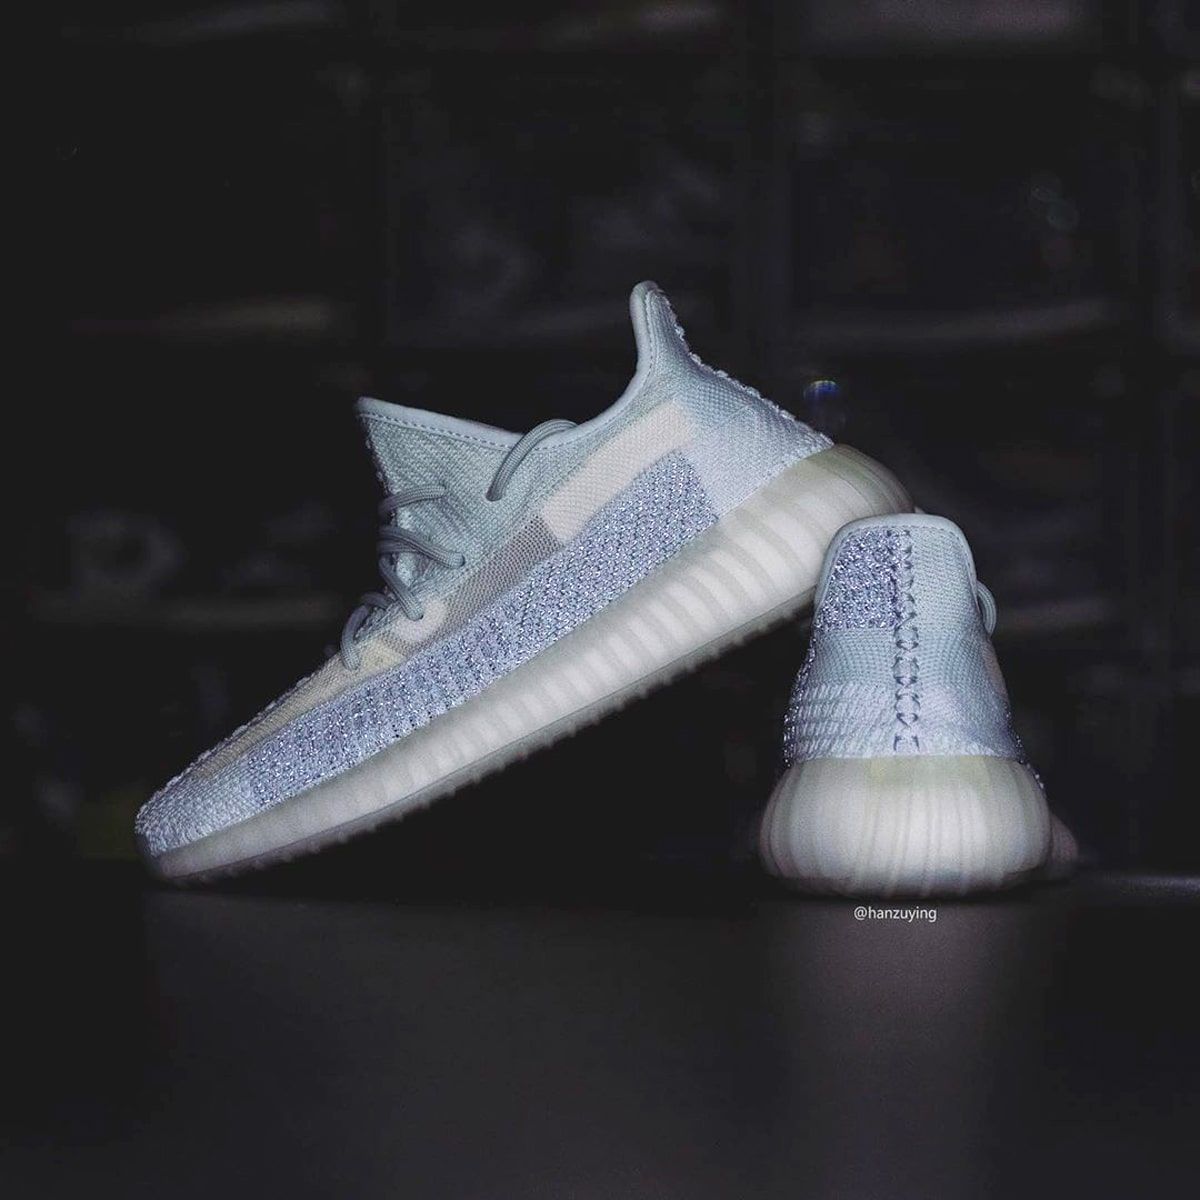 yeezy supply cloud white reflective